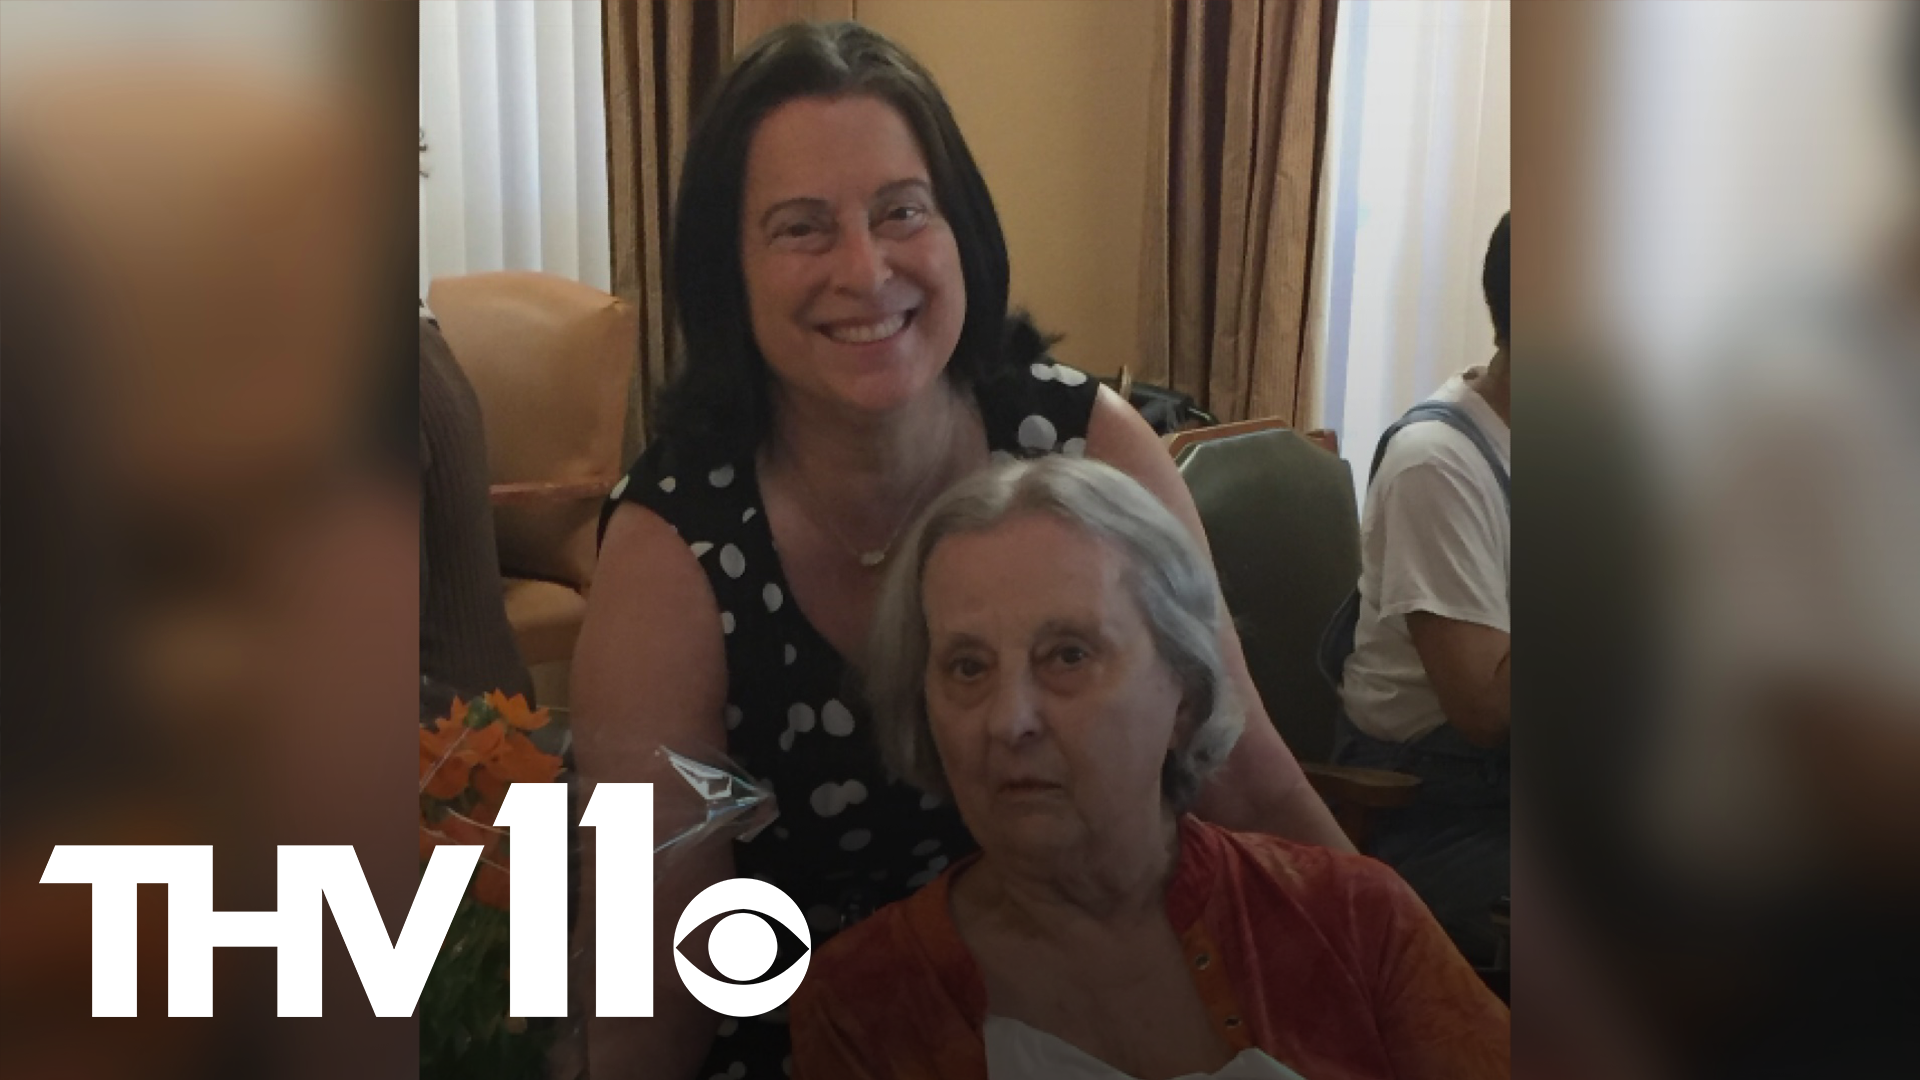 We've seen image after image of families trying to visit loved ones while outside the nursing home. But those images are also evidence of a problematic situation.